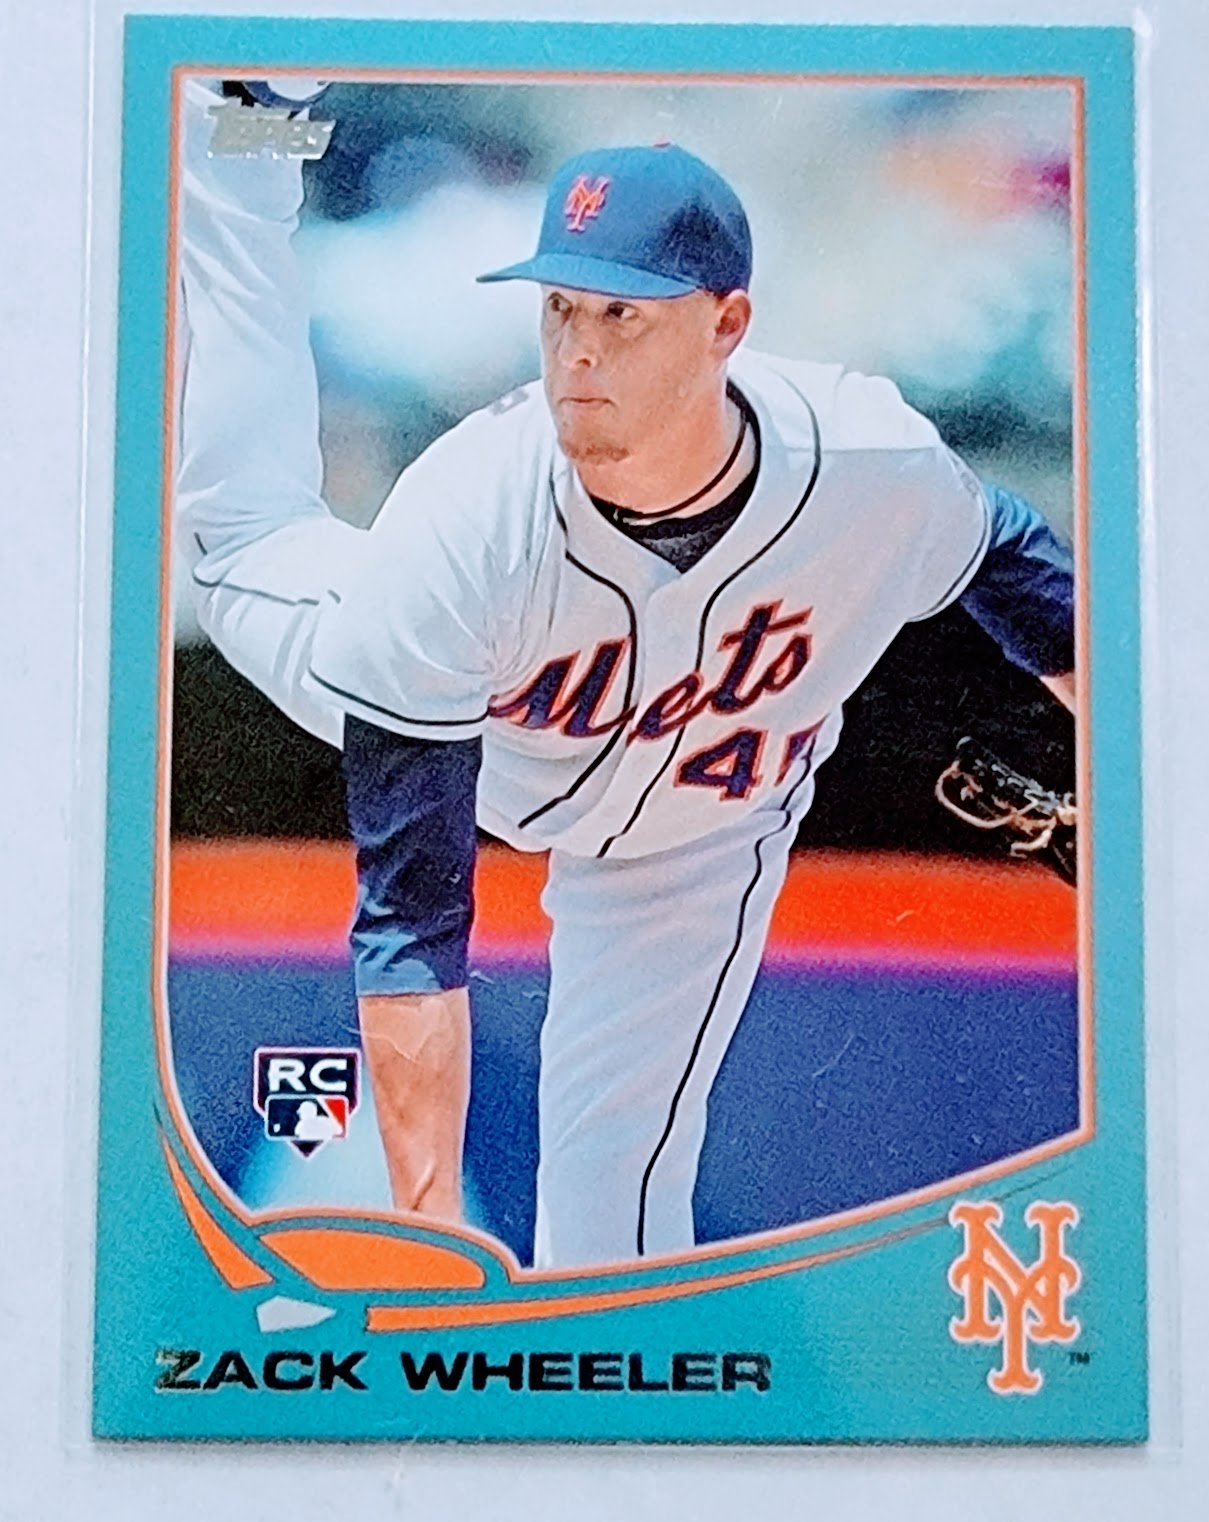 2013 Topps Update Zack Wheeler Blue Bordered Rookie Baseball Card TPTV simple Xclusive Collectibles   